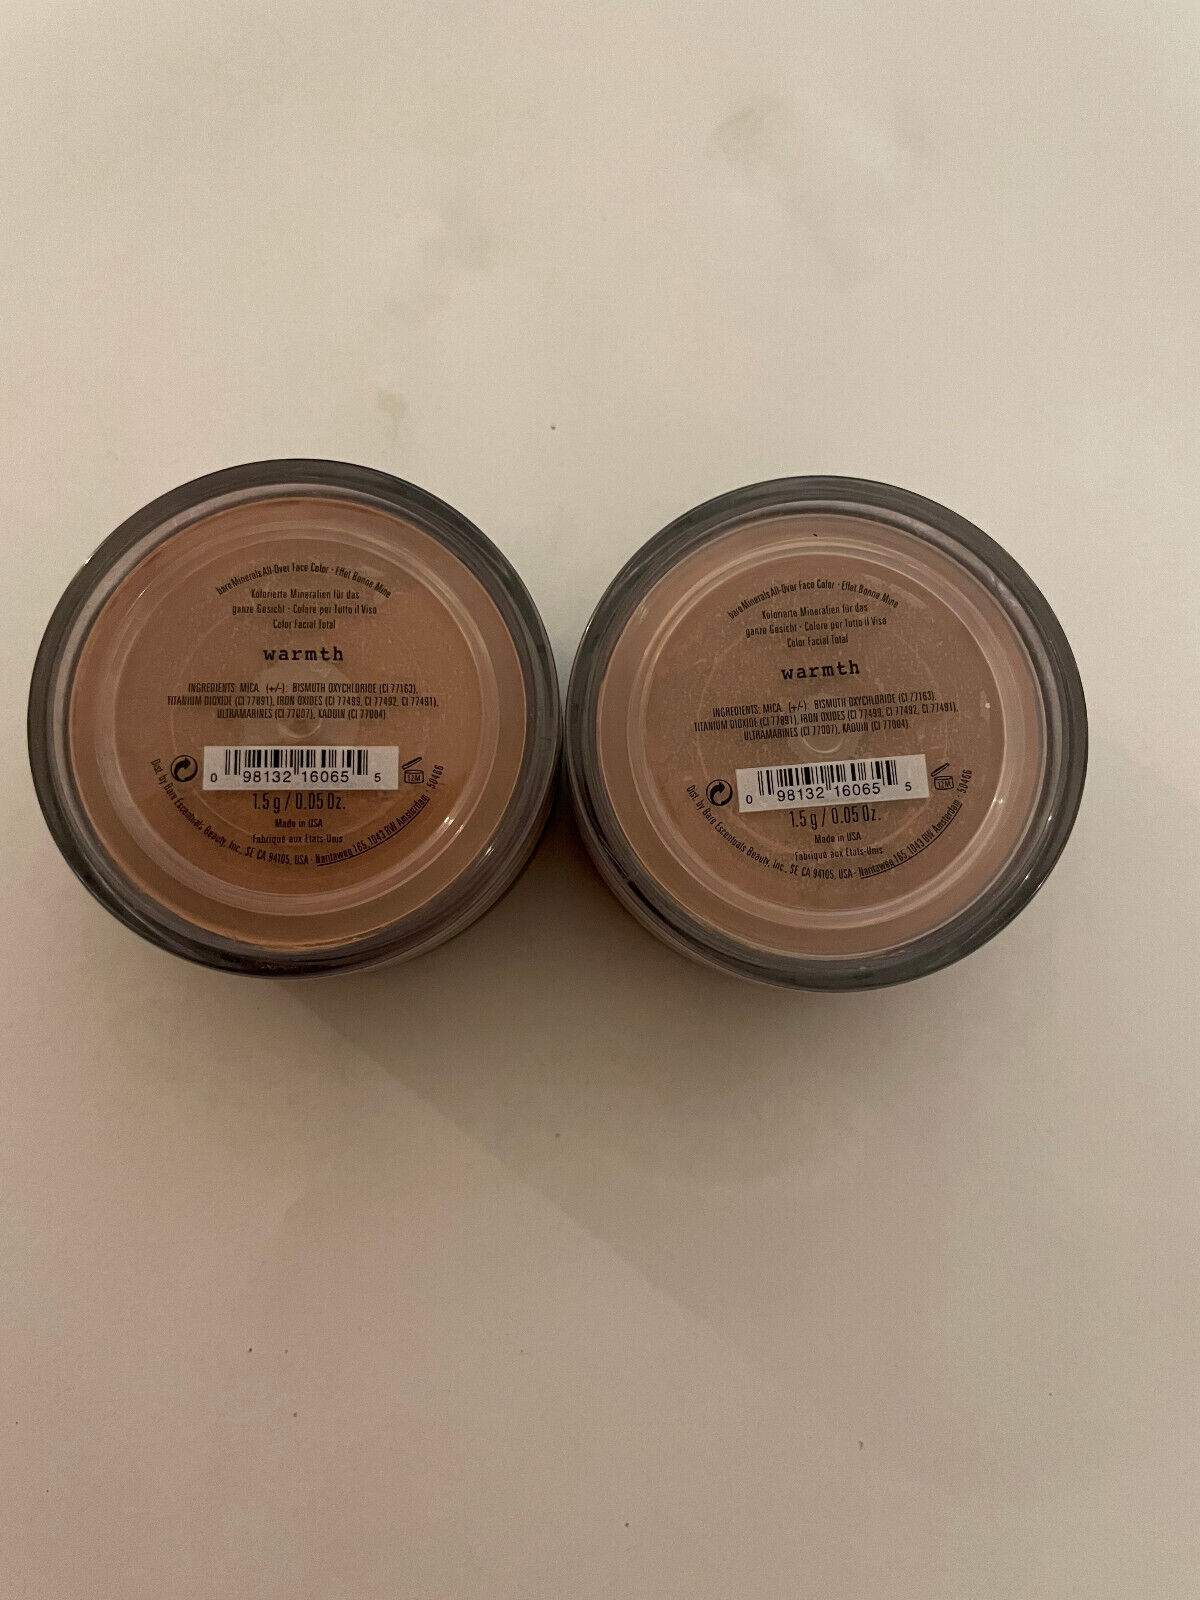 bareMinerals Bare Escentuals Warmth All-Over Face Color 1.5g PACK OF 2